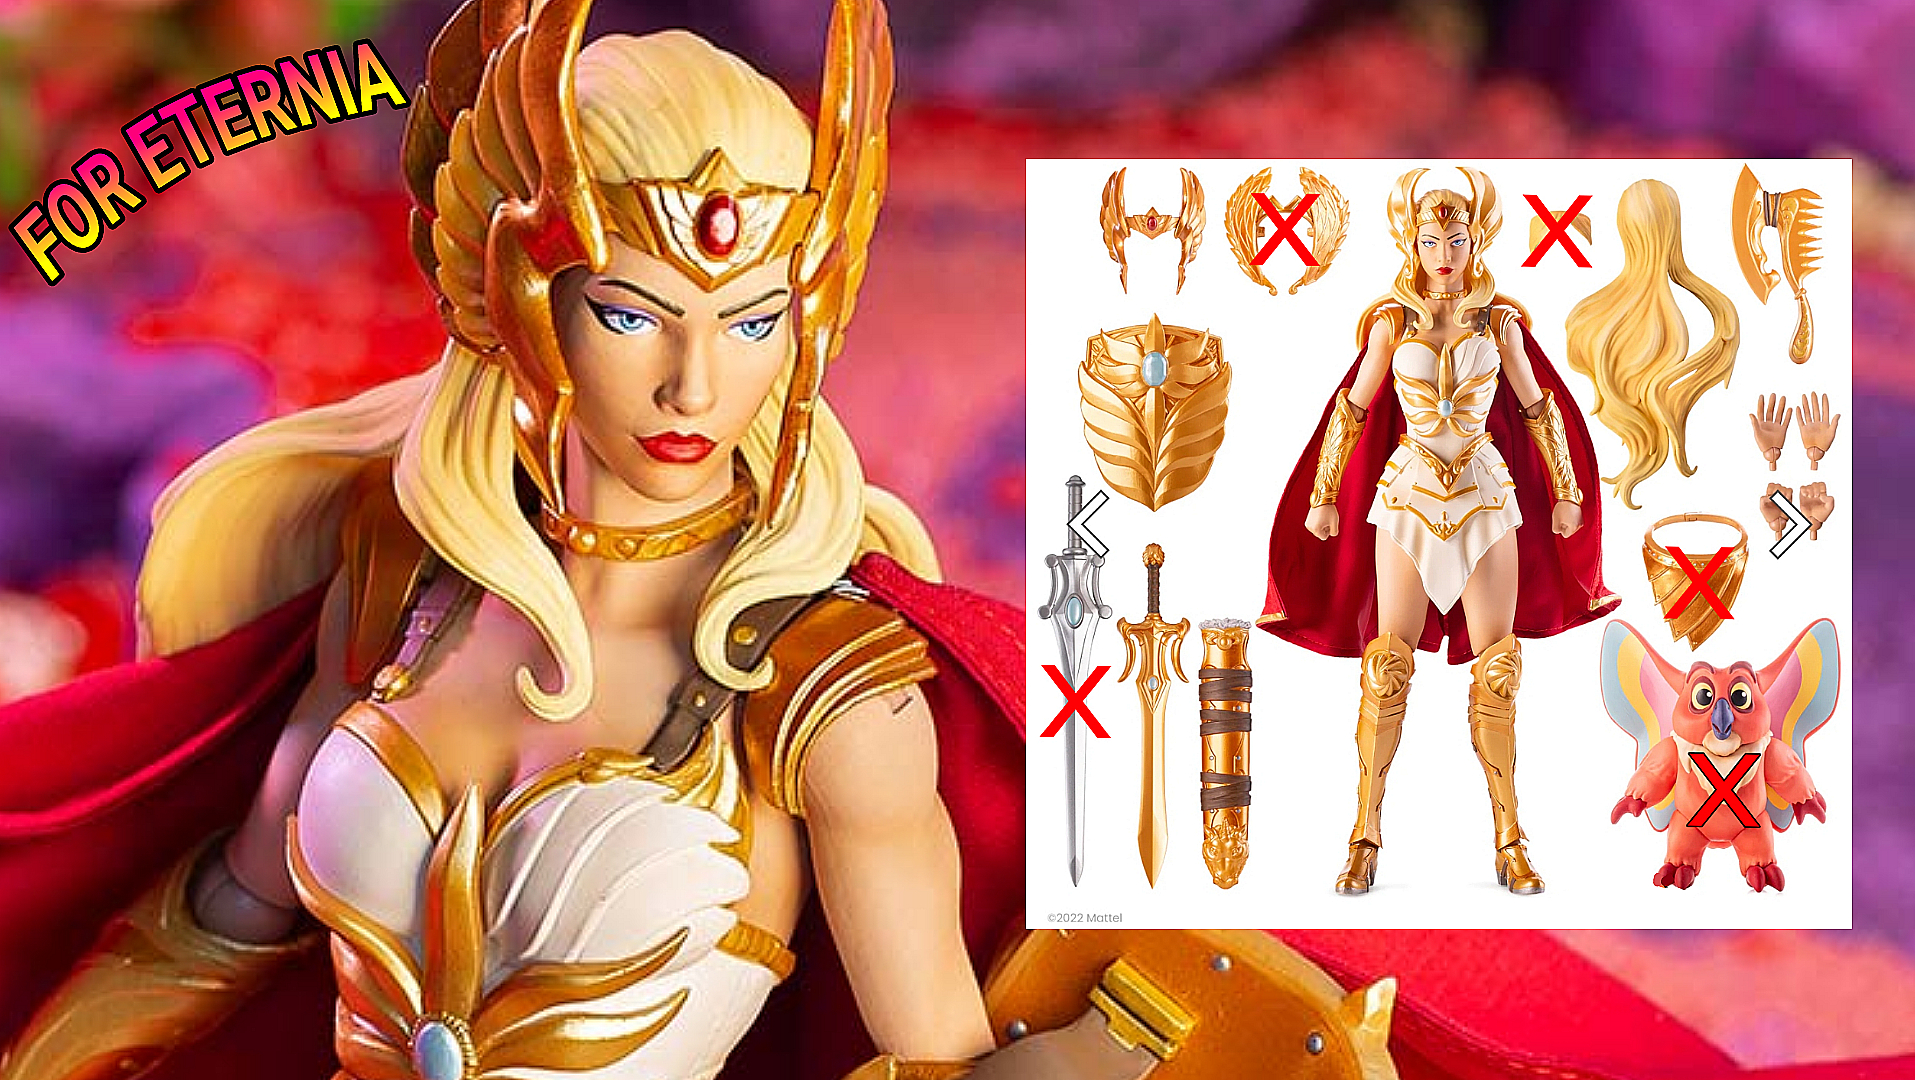 Mondo She-Ra 1/6 Scale Figure Regular Edition is now available for less (in price and accessories)